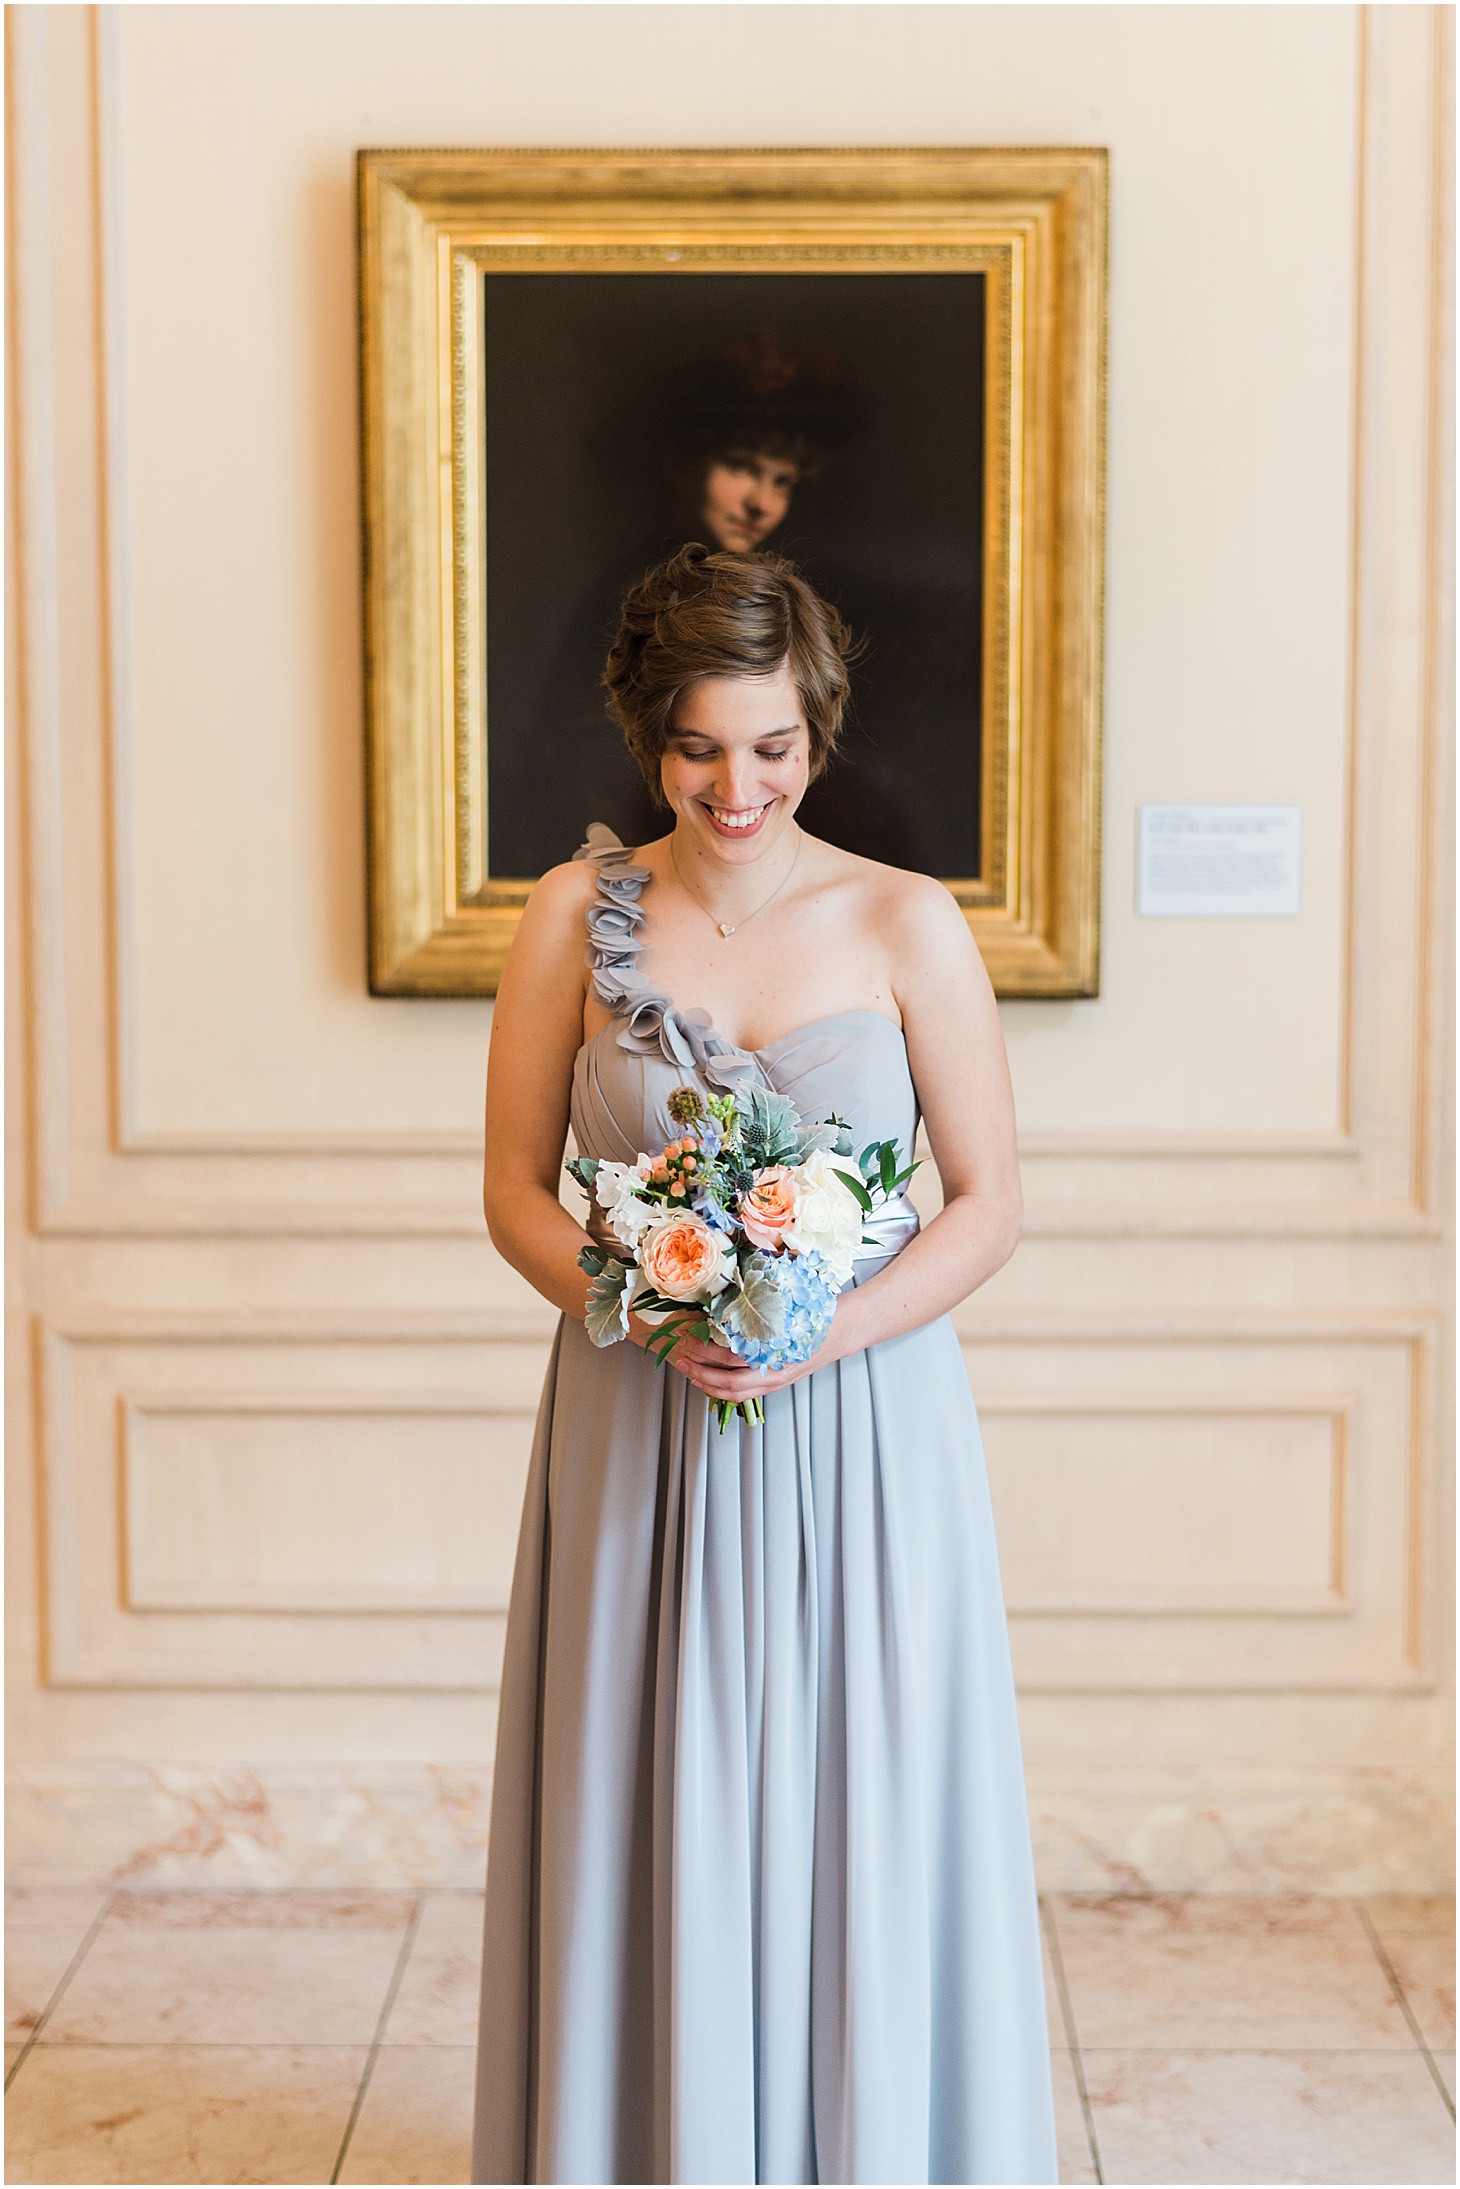 Azazie Dress, Bridesmaid Portraits at National Museum of Women in the Arts, Kimpton Donovan Hotel, Dusty Blue and Pink Jewish Wedding at Women in the Arts, Sarah Bradshaw Photography, DC Wedding Photographer 